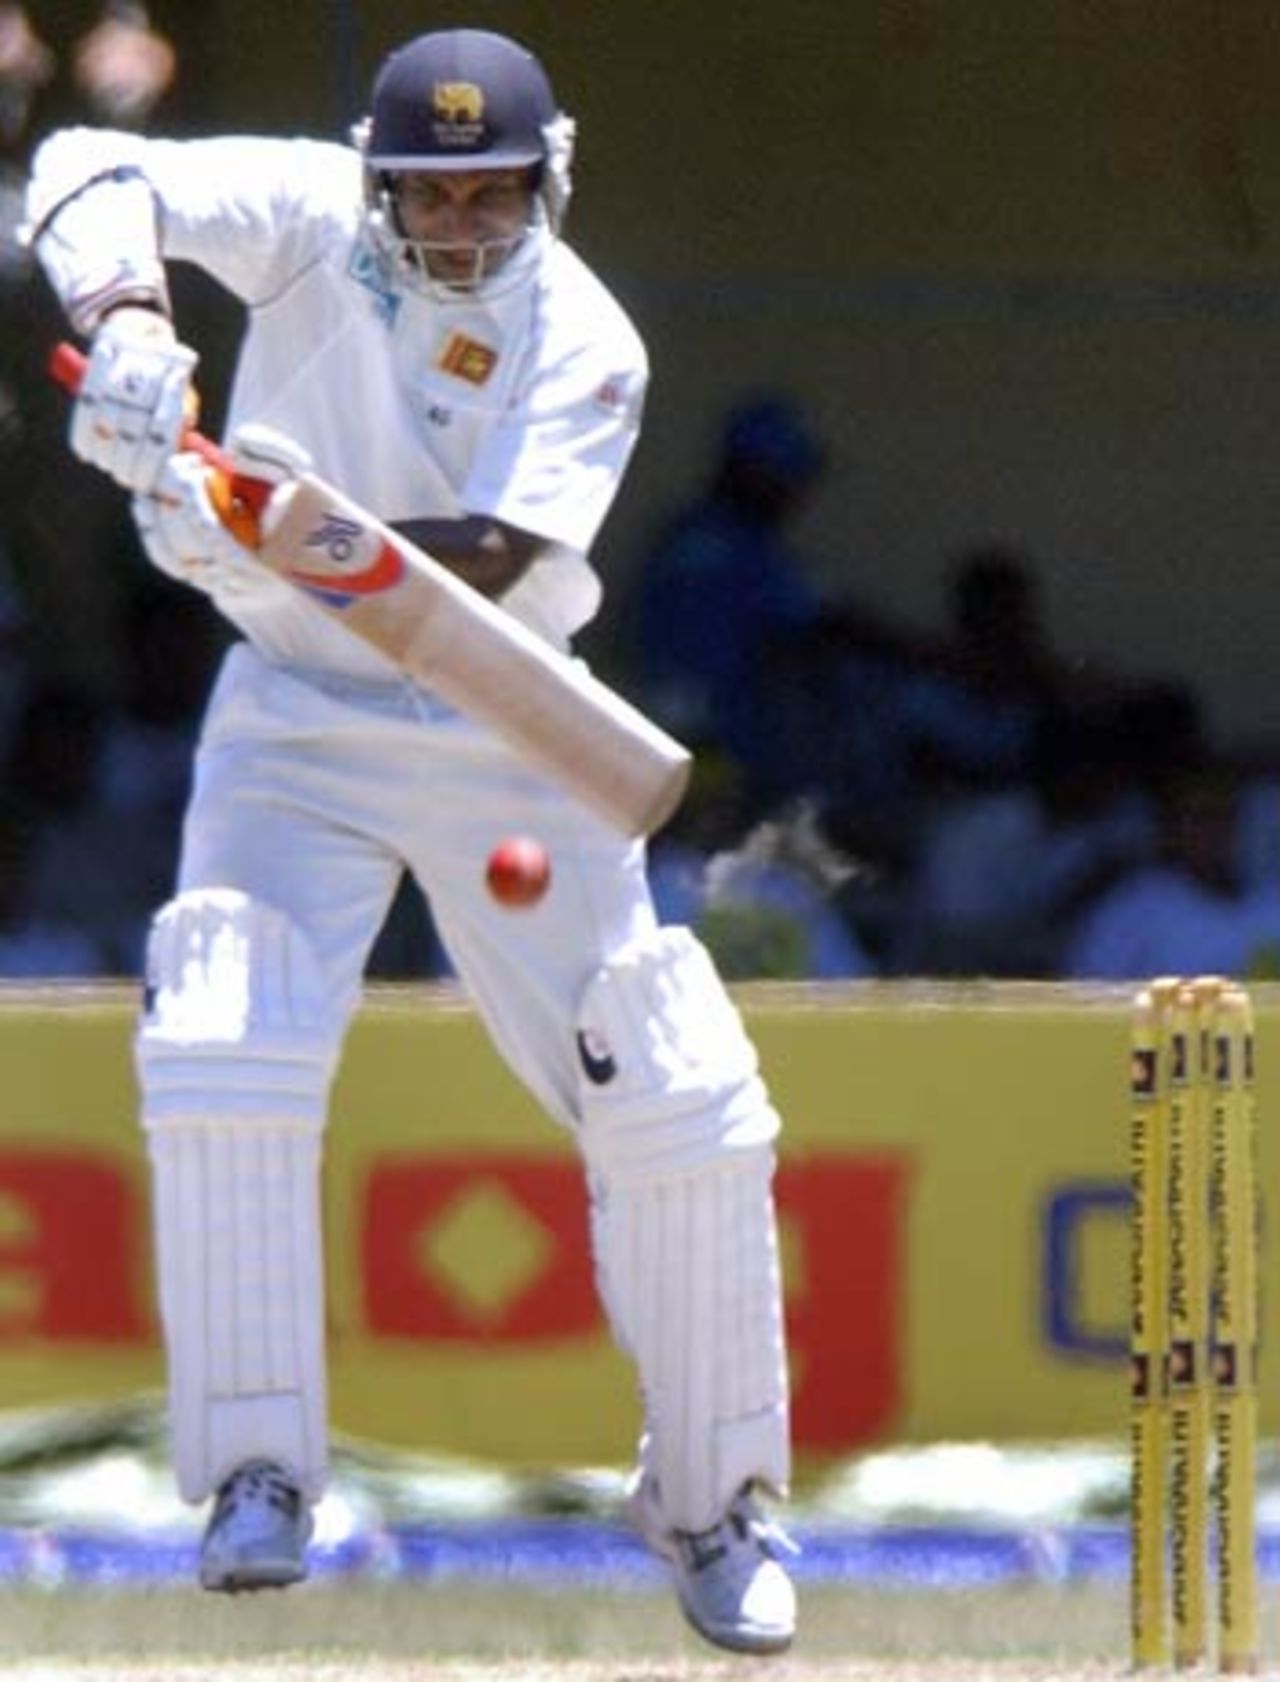 Sanath Jayasuriya punches a ball away to the off side on the way to 73 against South Africa, 2nd Test, 4th day, Colombo, August 7, 2006